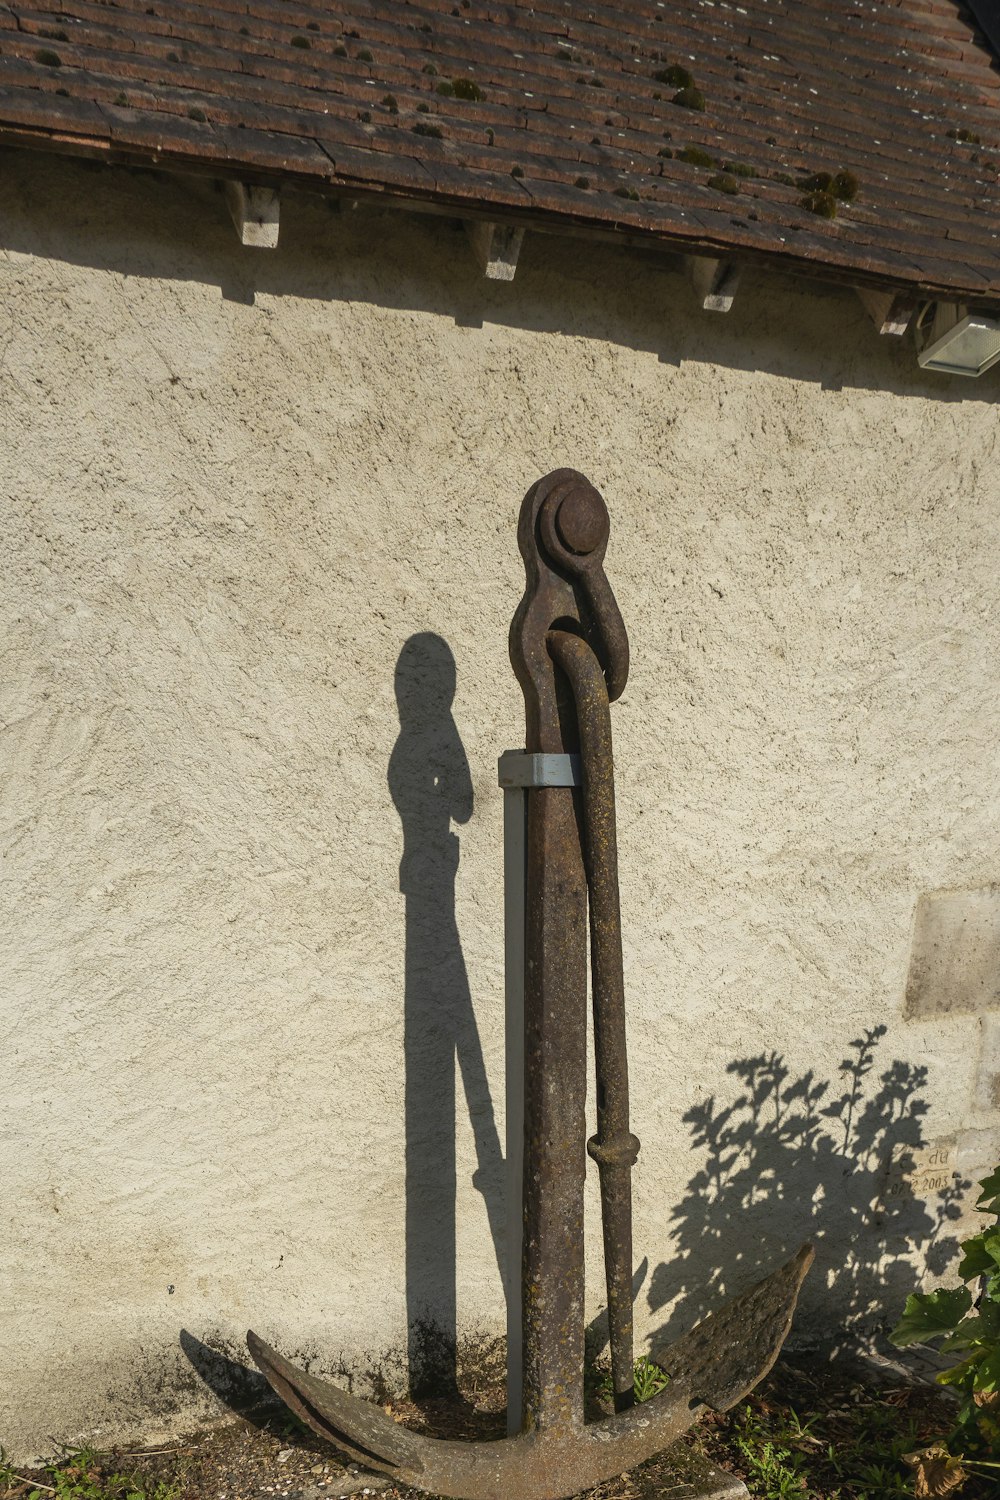 a rusted metal pole next to a white building